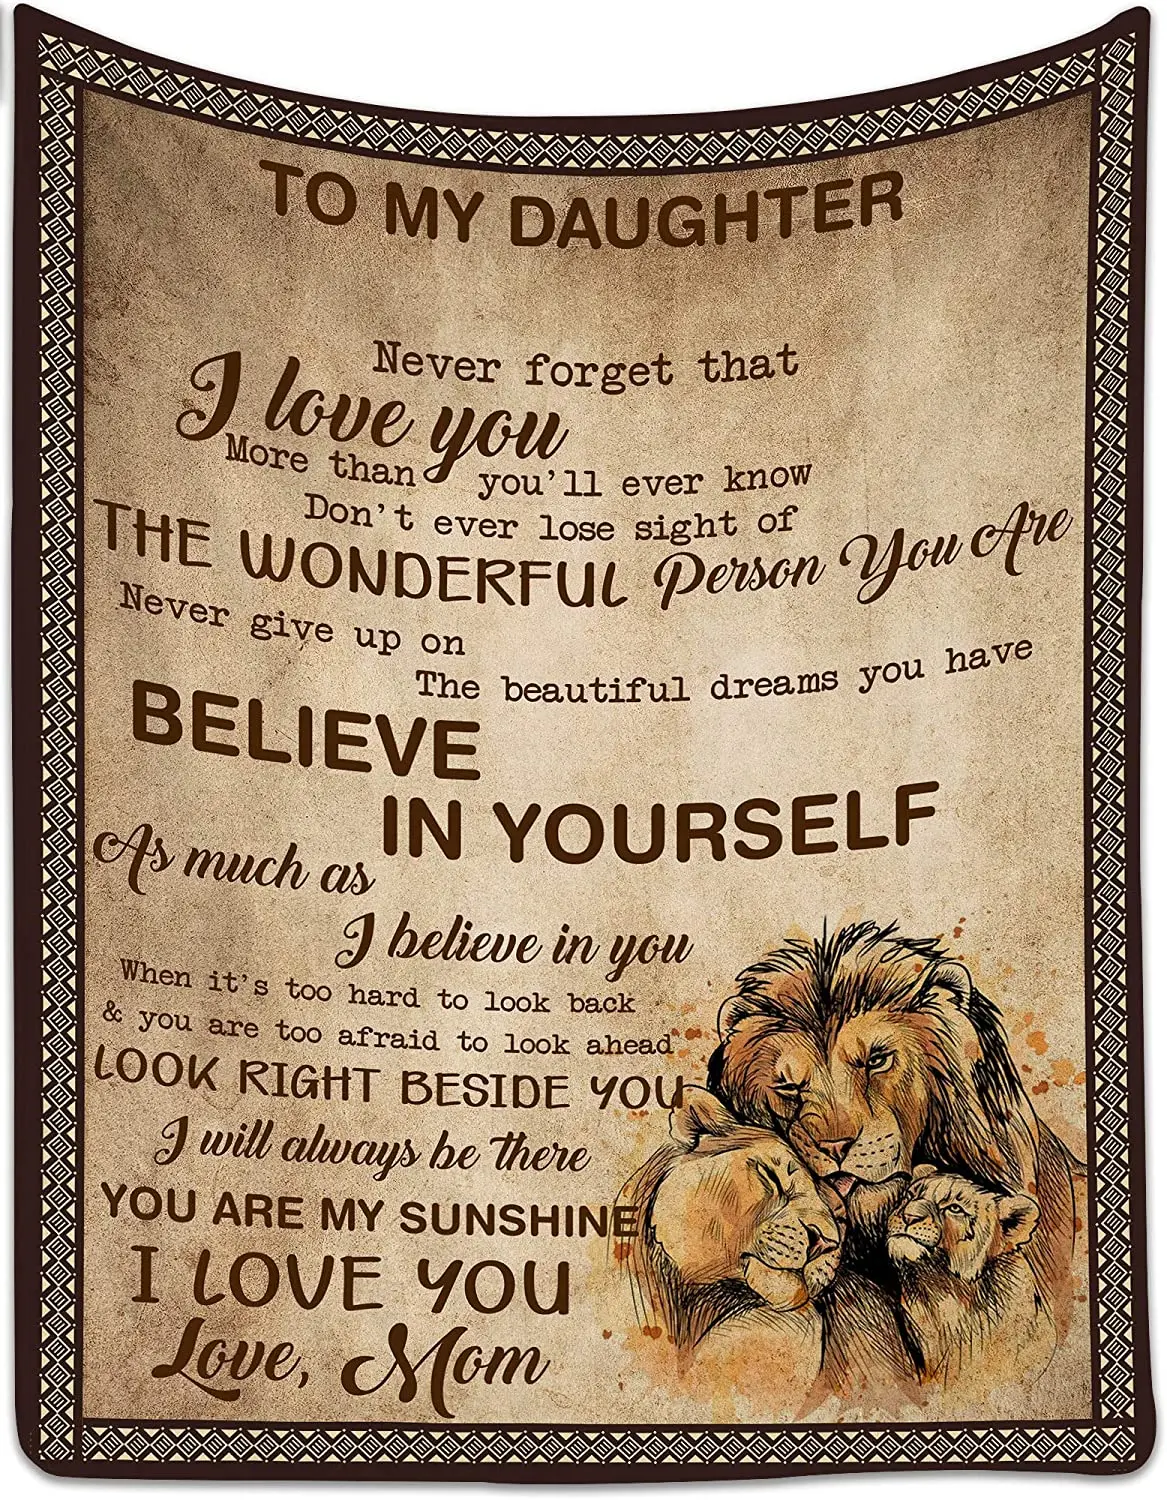 

Personalized Fleece Blanket to My Daughter from Mom - Never Forget That I Love You - Customized Lion Blanket